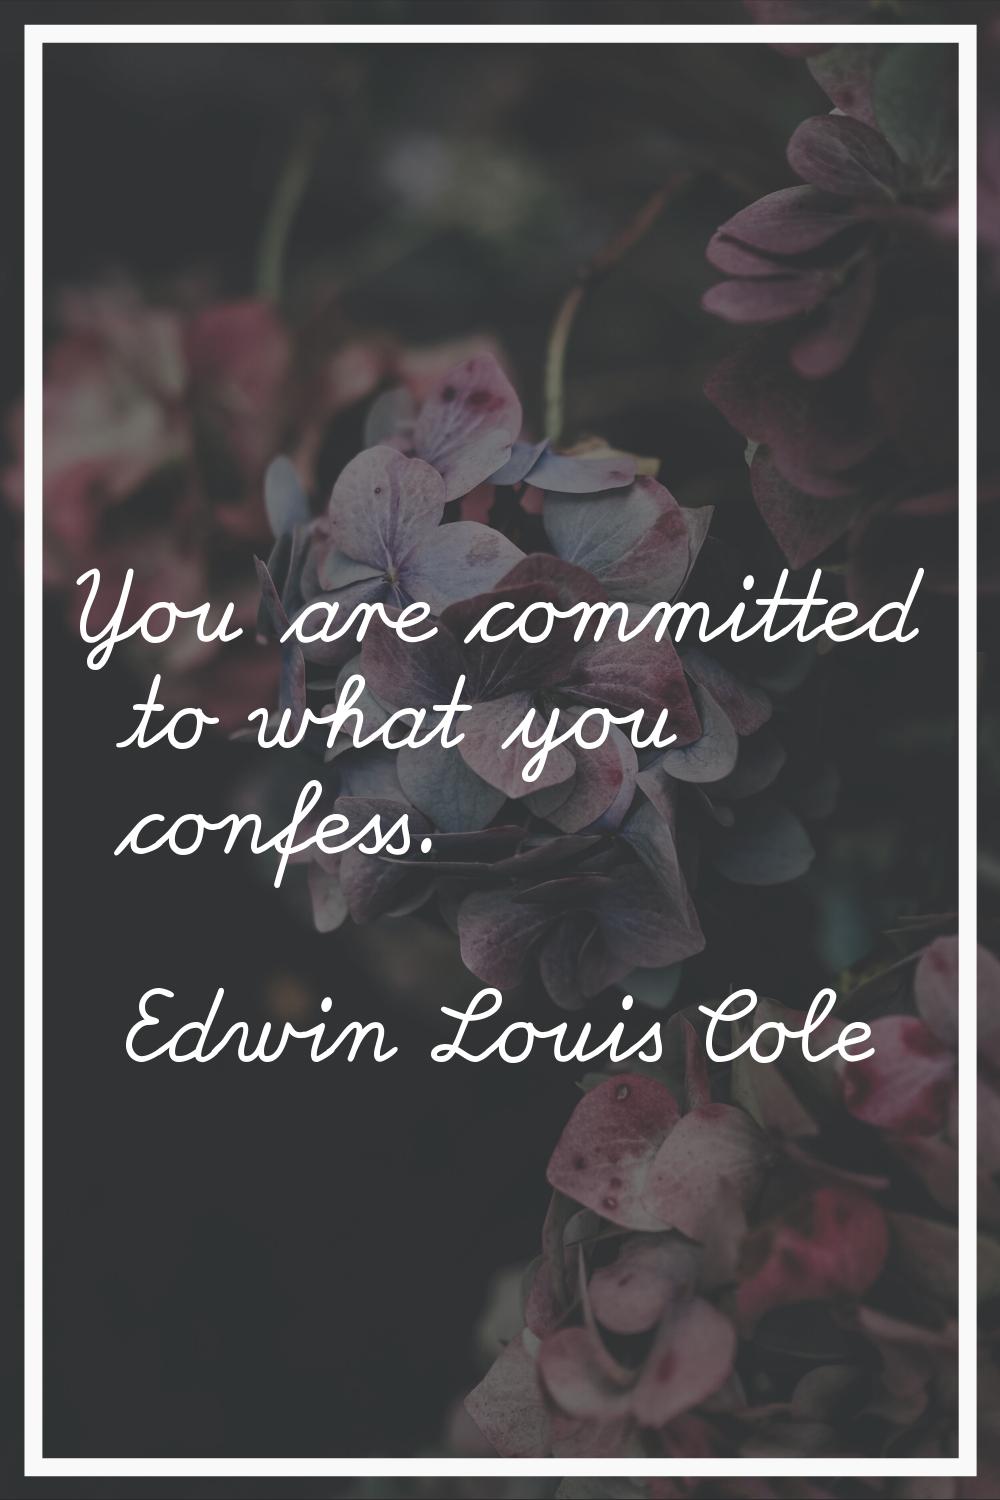 You are committed to what you confess.